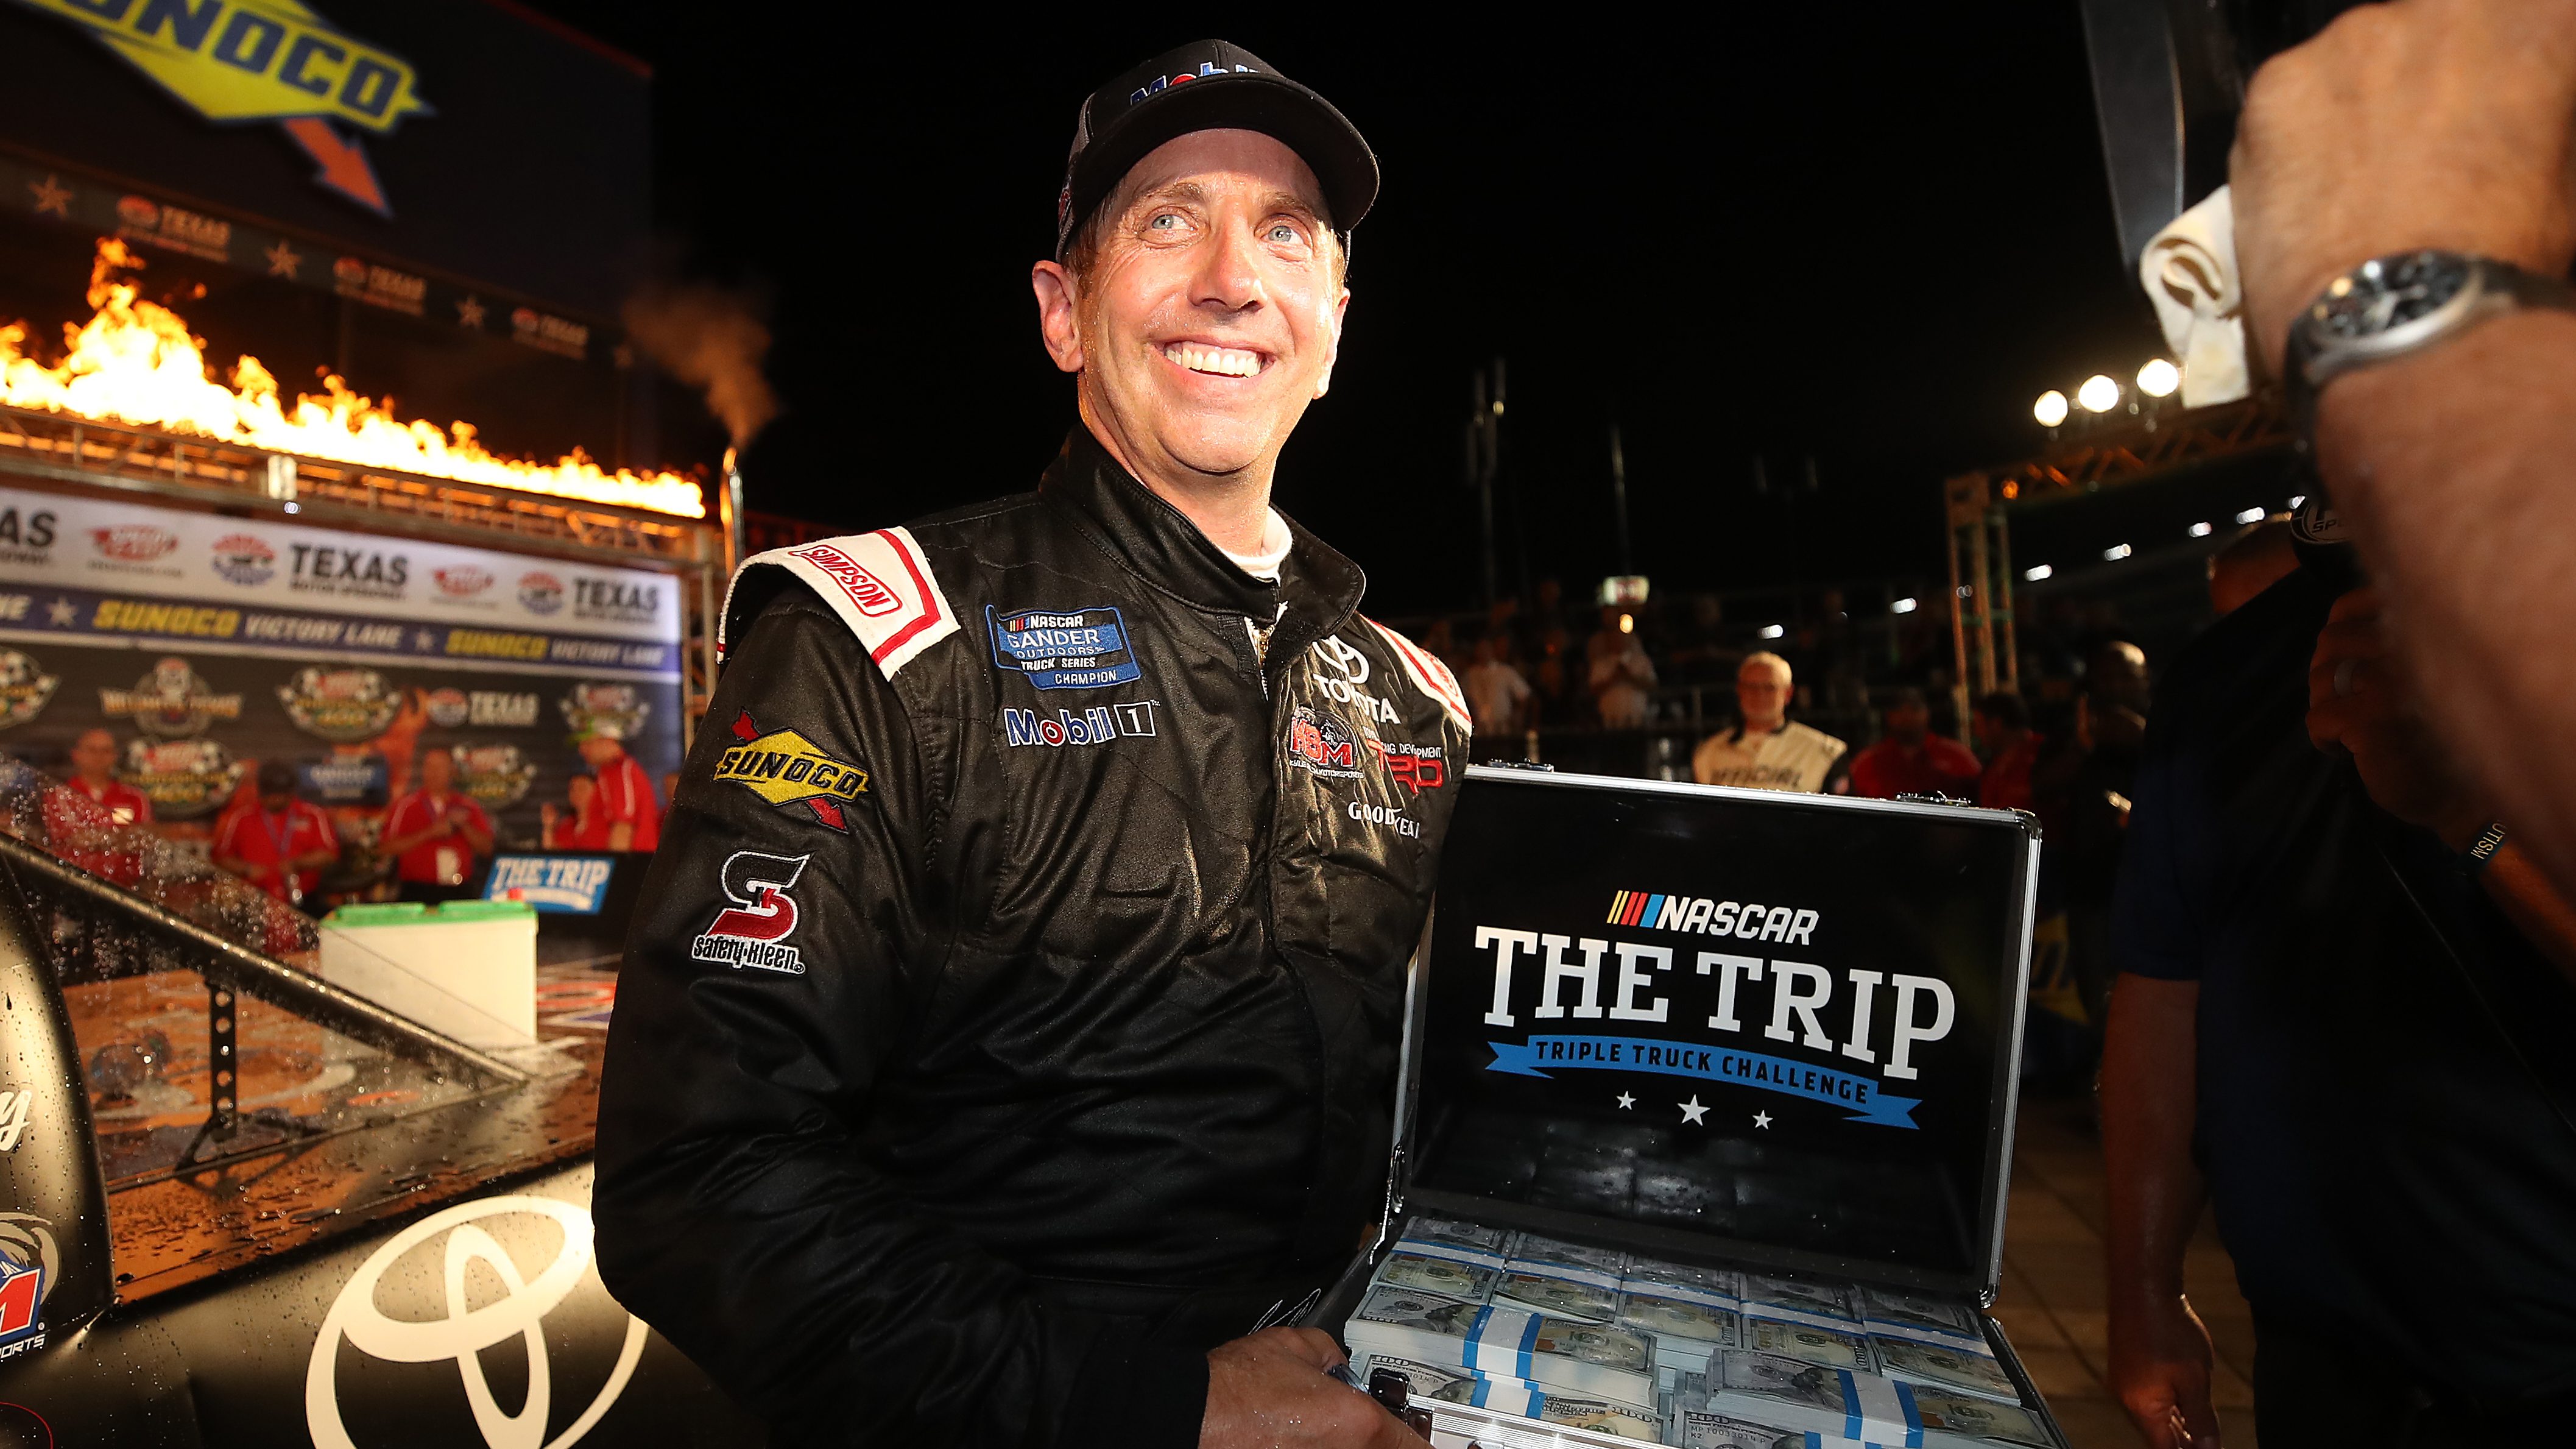 19x-Time Cup Series Winner Greg Biffle Just Got Engaged